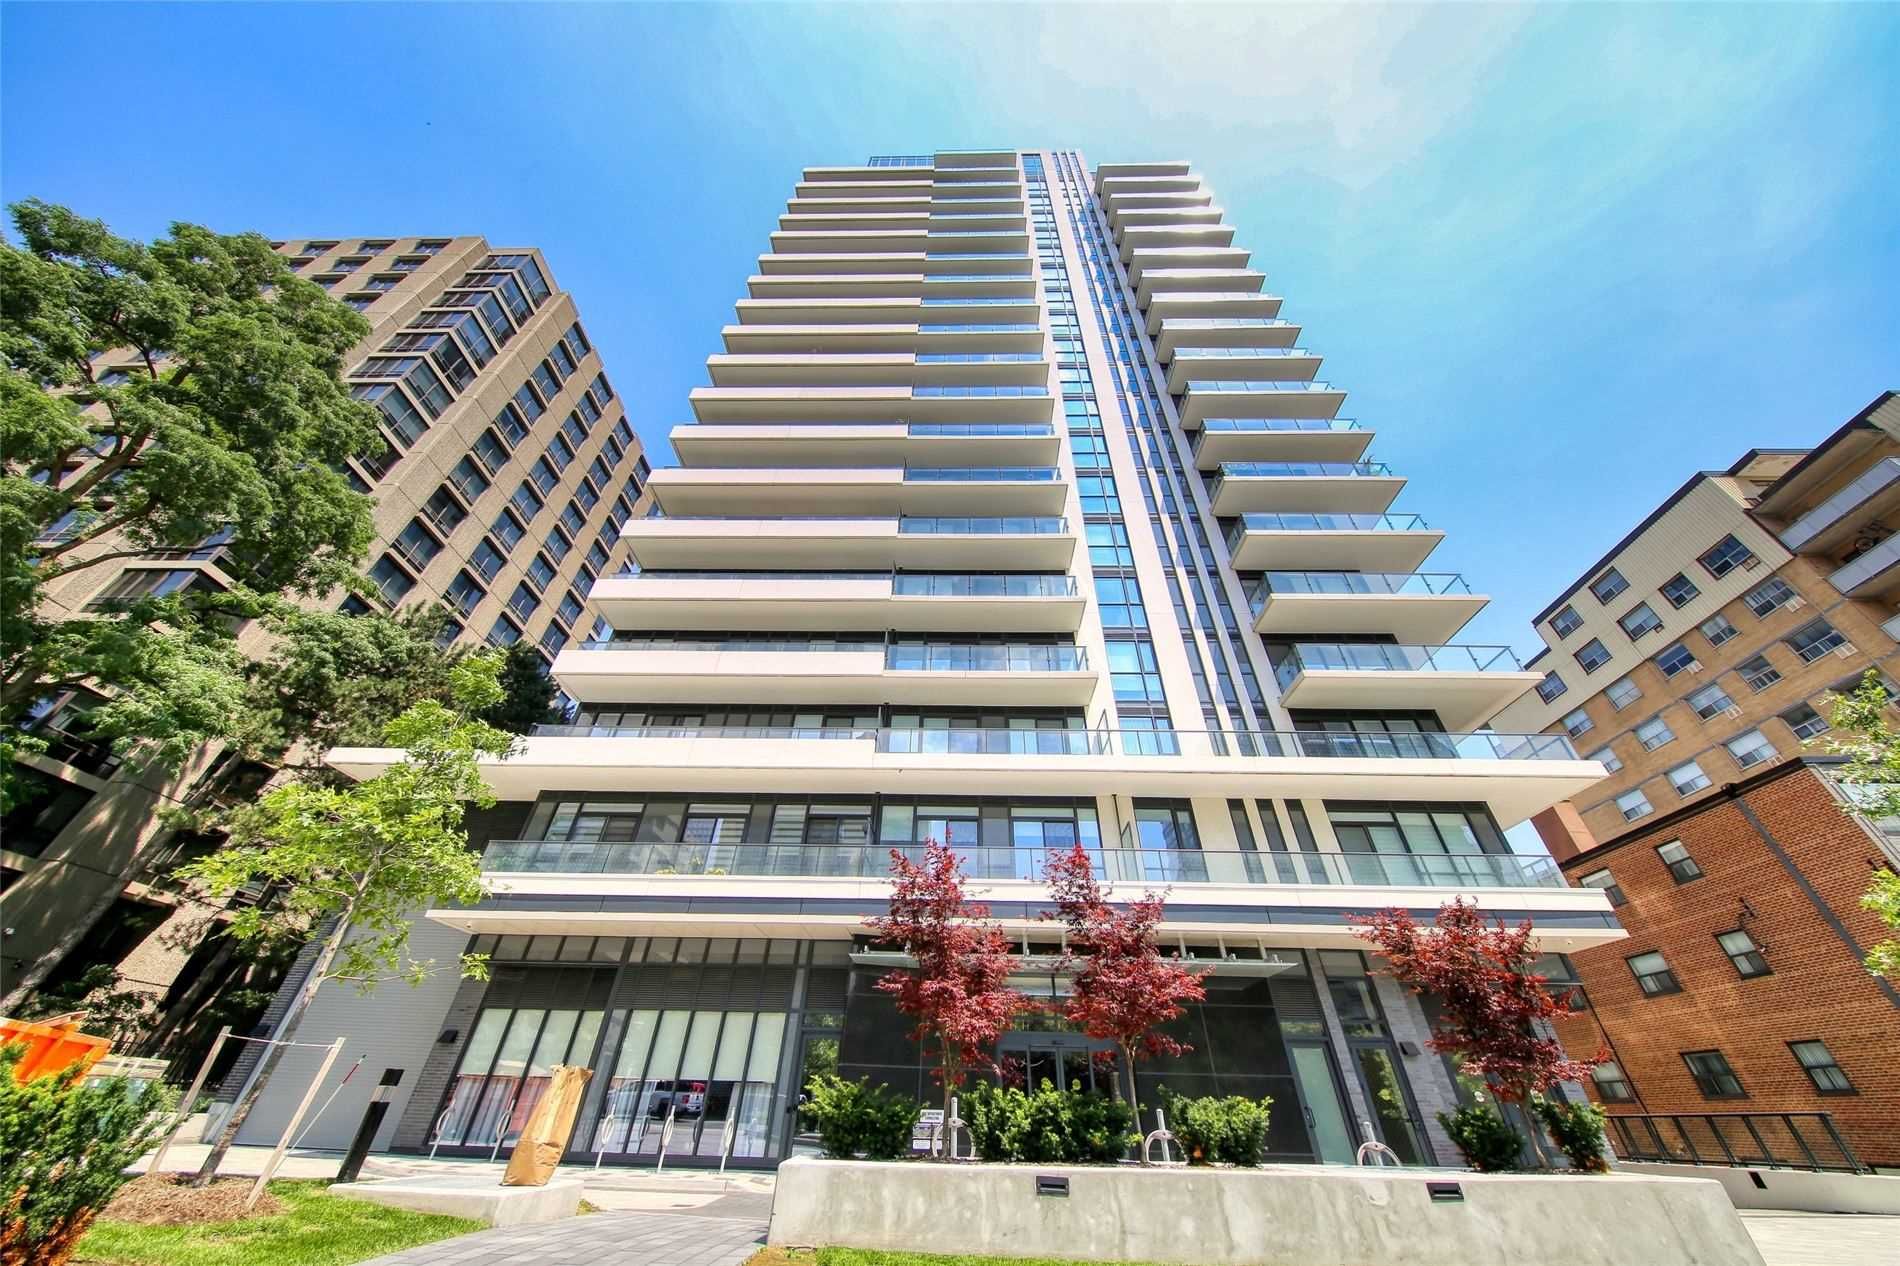 609 Avenue Rd. This condo at 609 Avenue Road Condos is located in  Midtown, Toronto - image #2 of 2 by Strata.ca